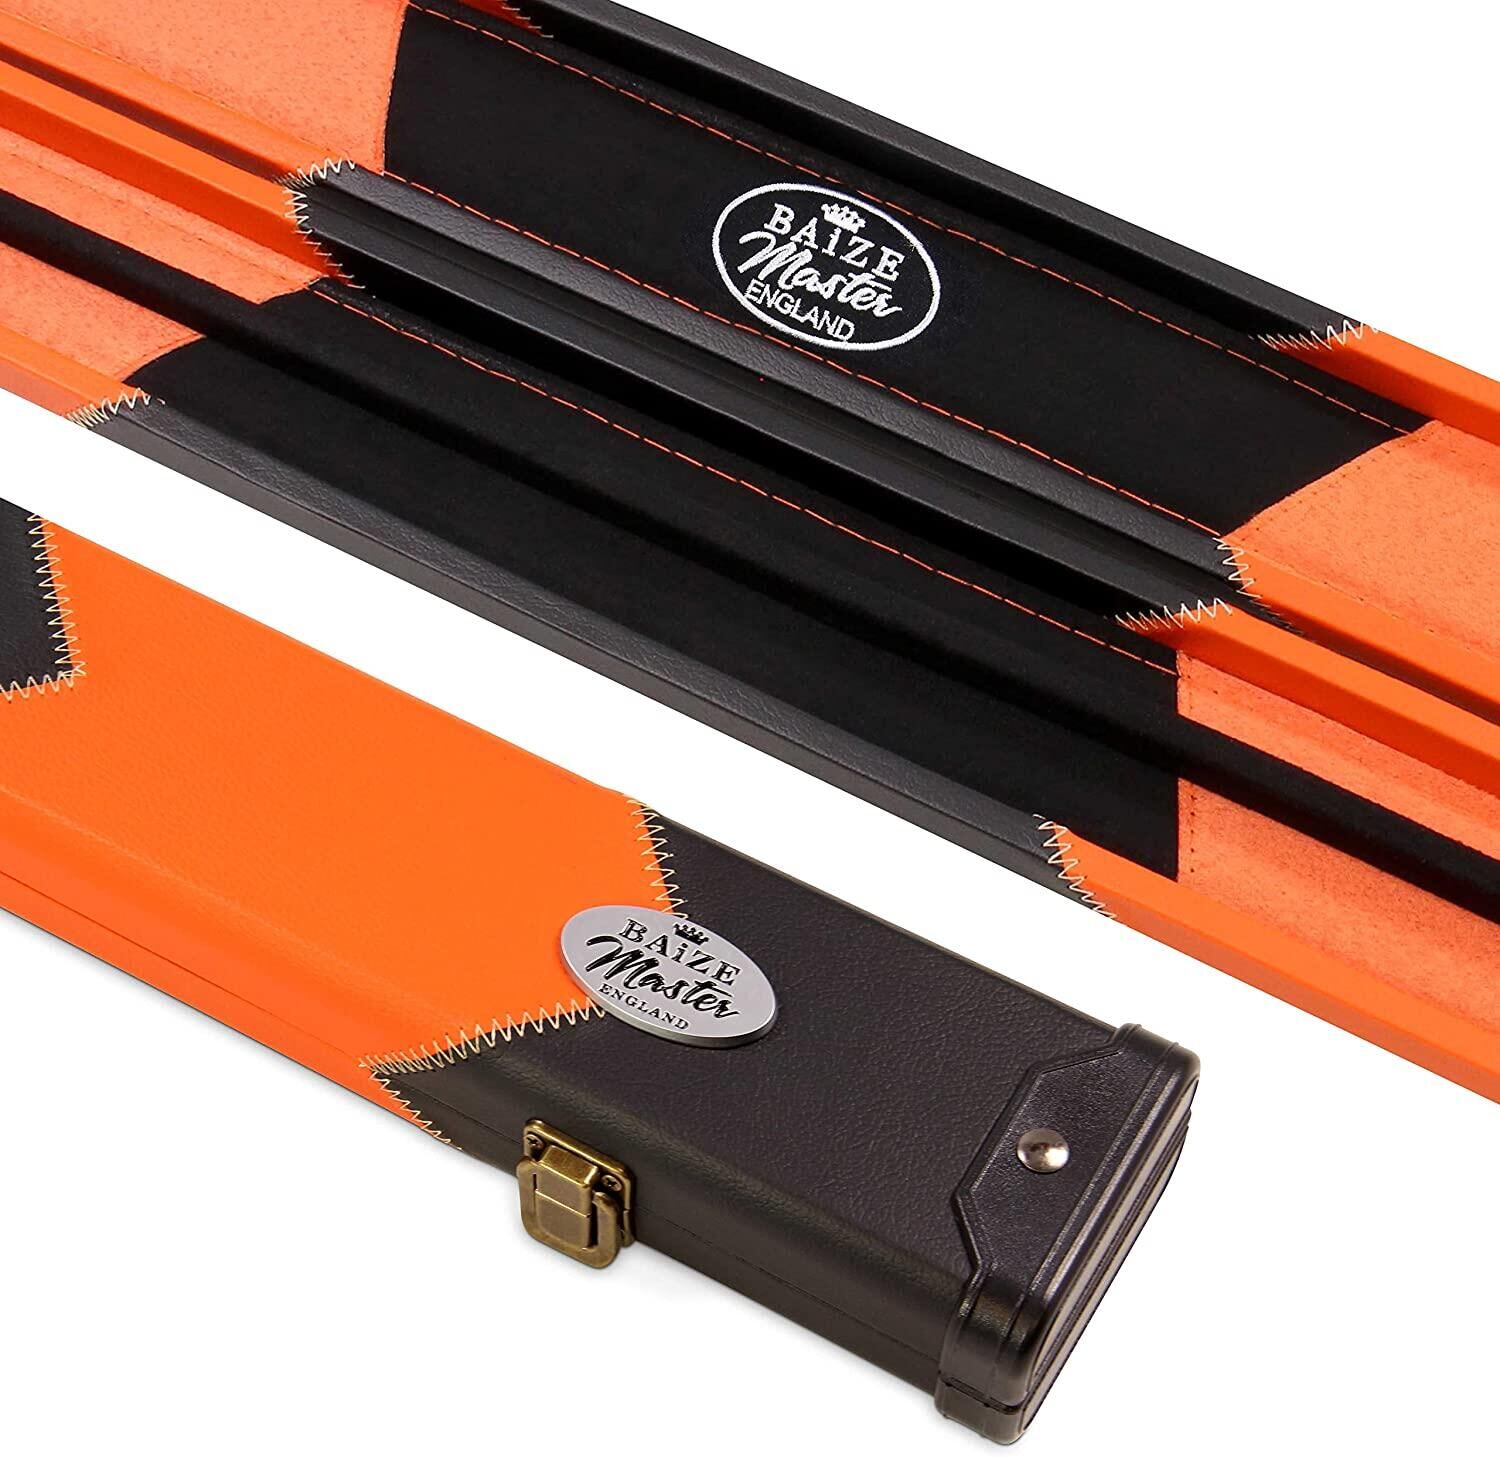 FUNKY CHALK Baize Master ORANGE ARROW 2pc Deluxe Snooker Pool Cue Case with Matching Interi